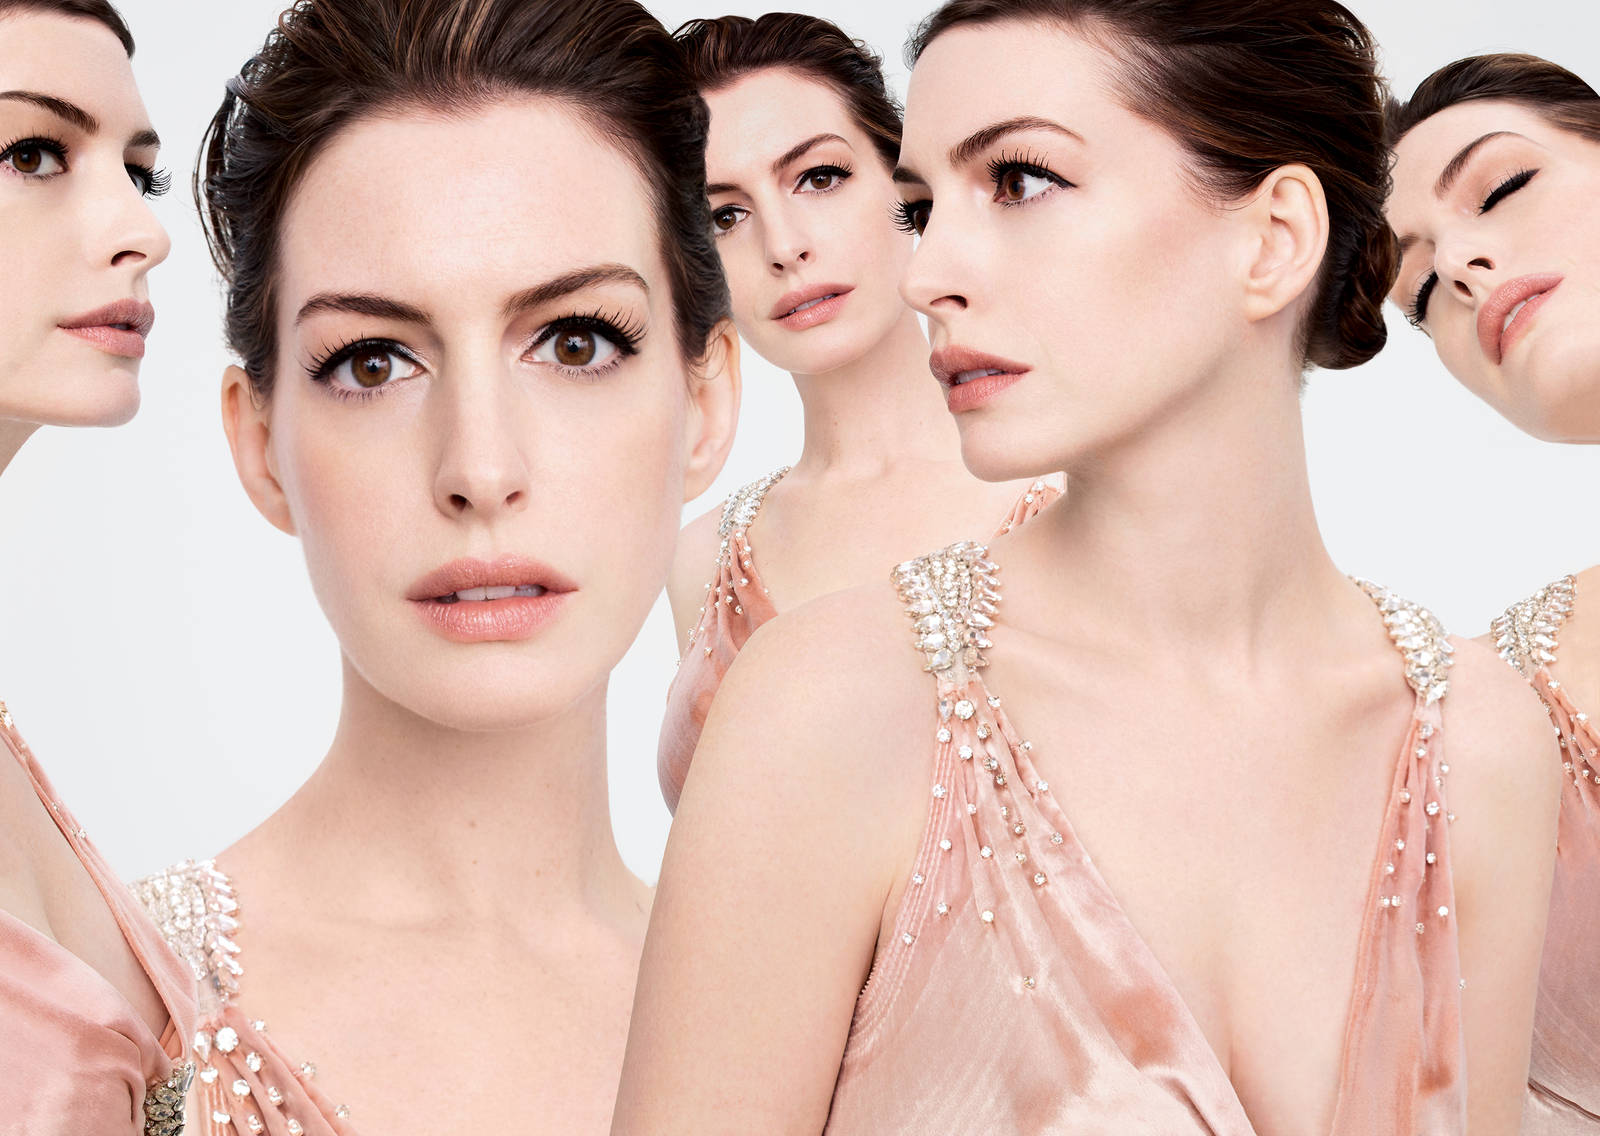 Anne Hathaway Looking Gorgeously Glamorous Background